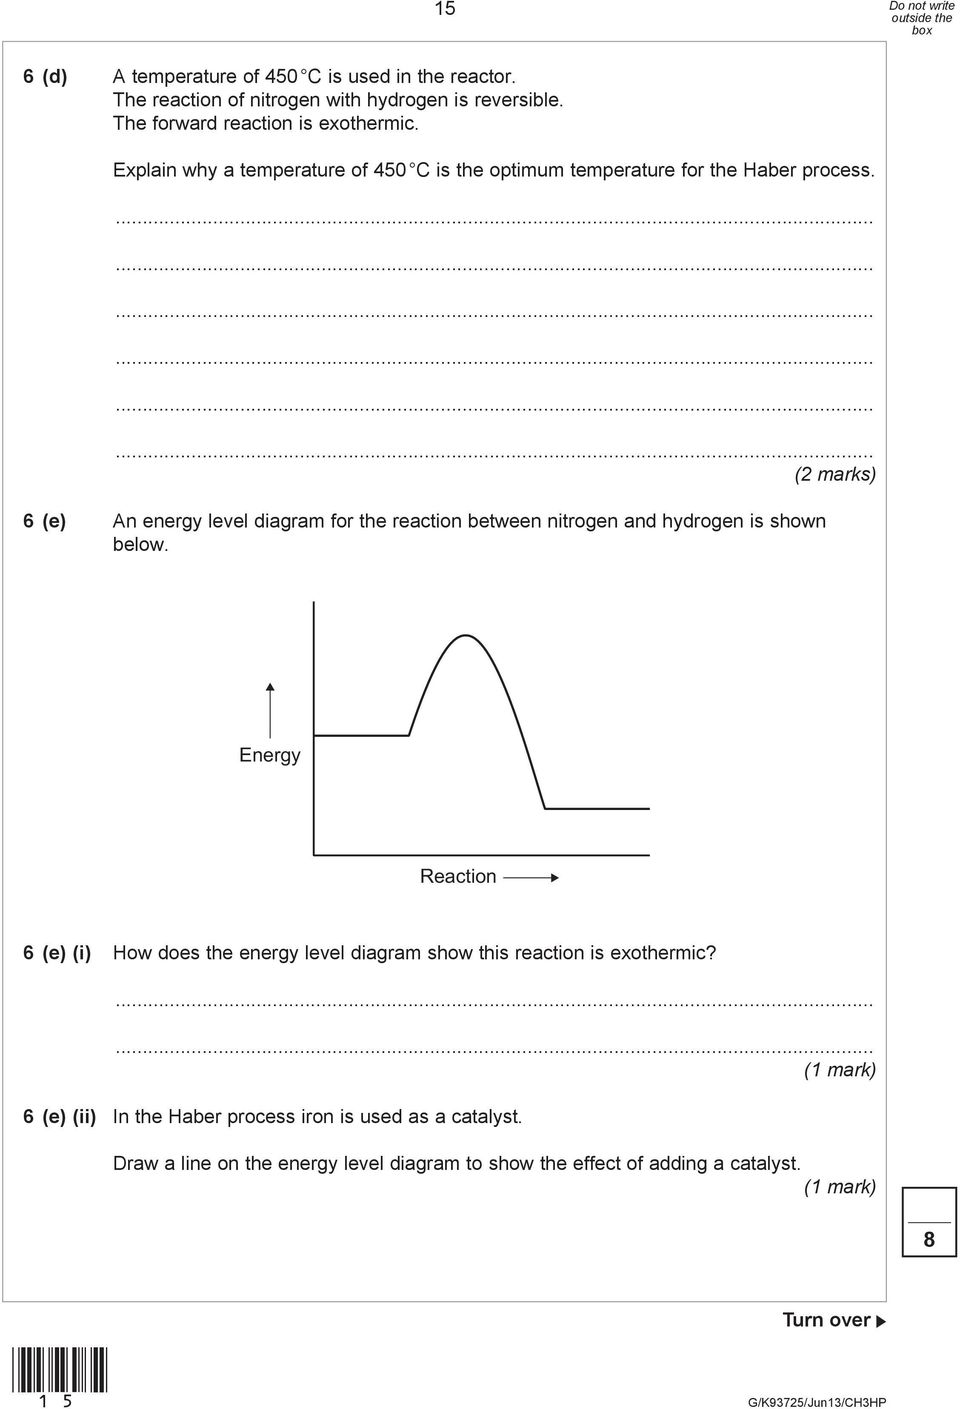 (2 marks) 6 (e) An energy level diagram for the reaction between nitrogen and hydrogen is shown below.